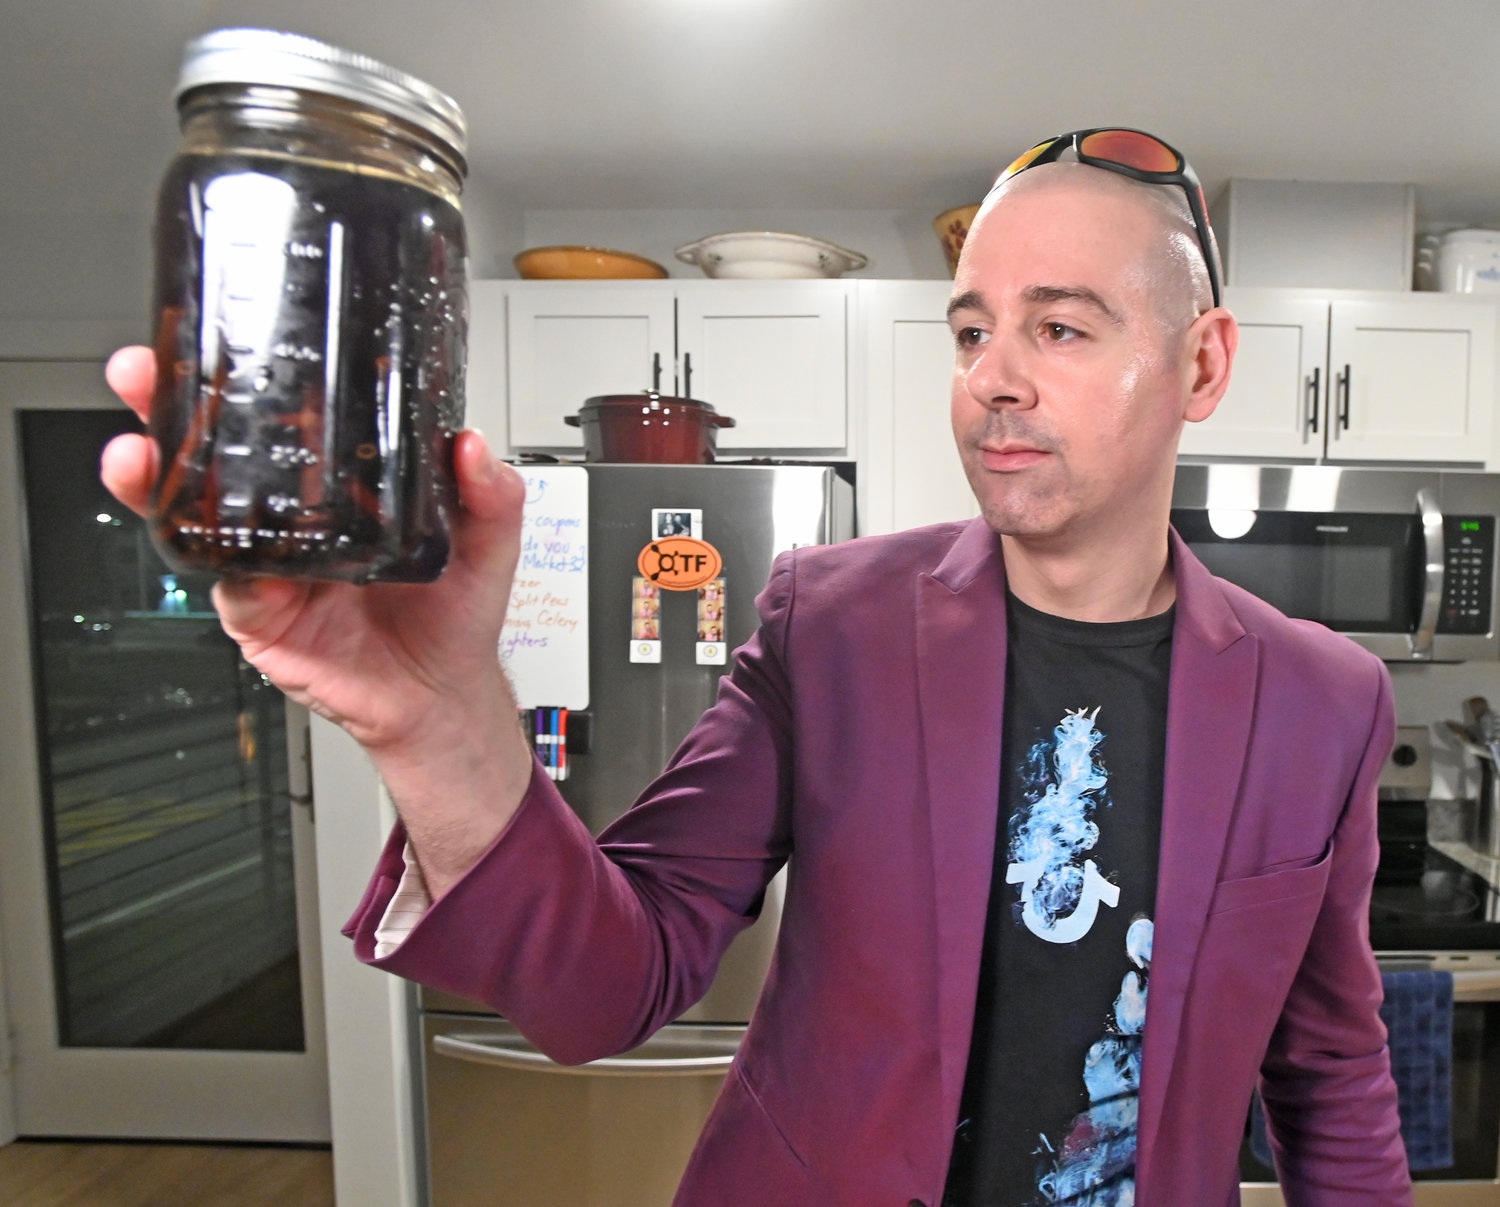 James Daino holds up his special concoction of vanilla extract Wednesday in his Rome kitchen.